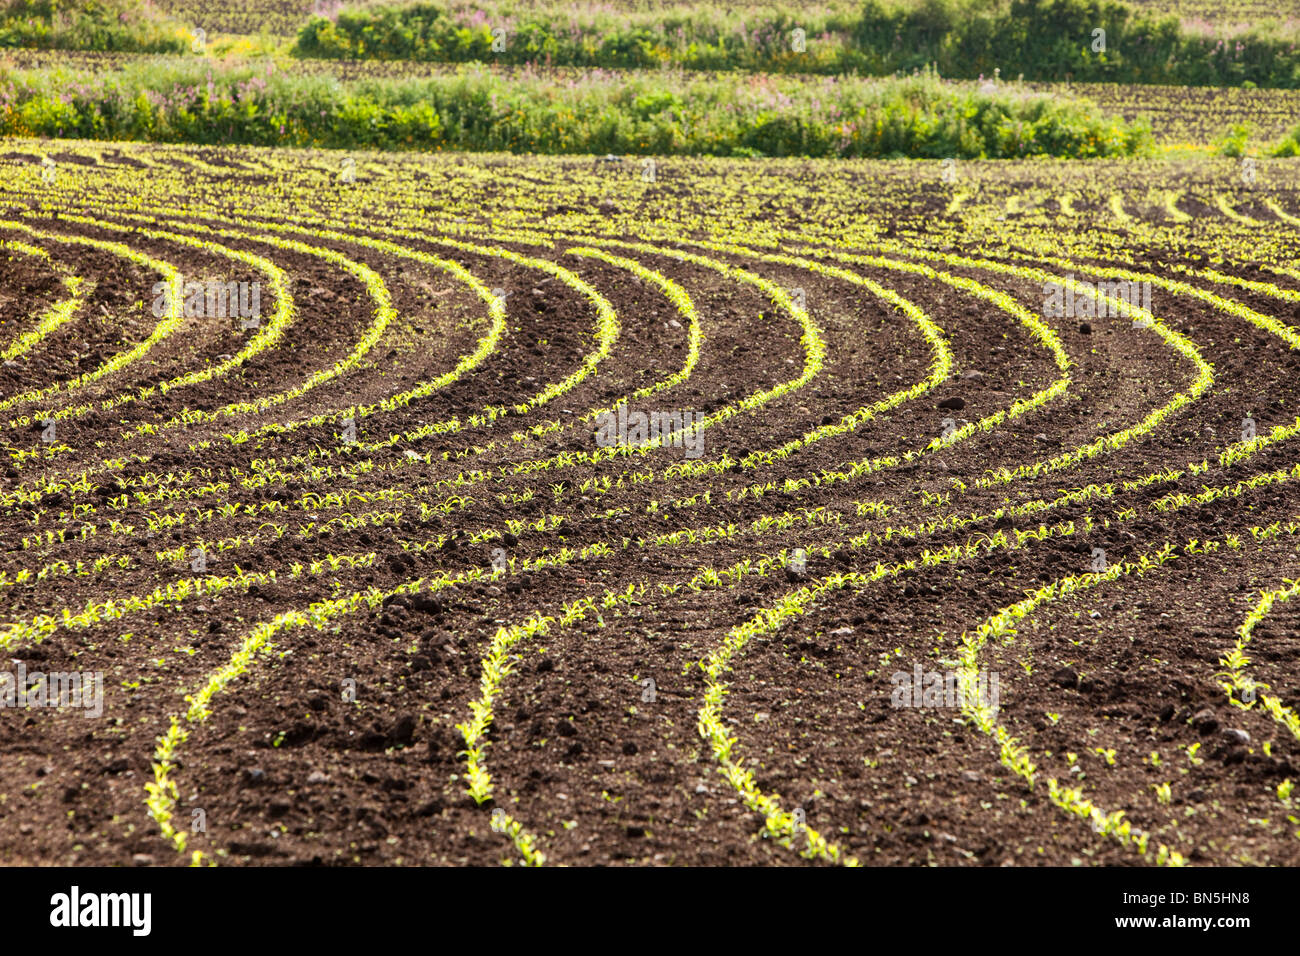 Maize crops planted in a wavy line in a field near Zennor in Cornwall, UK. Stock Photo